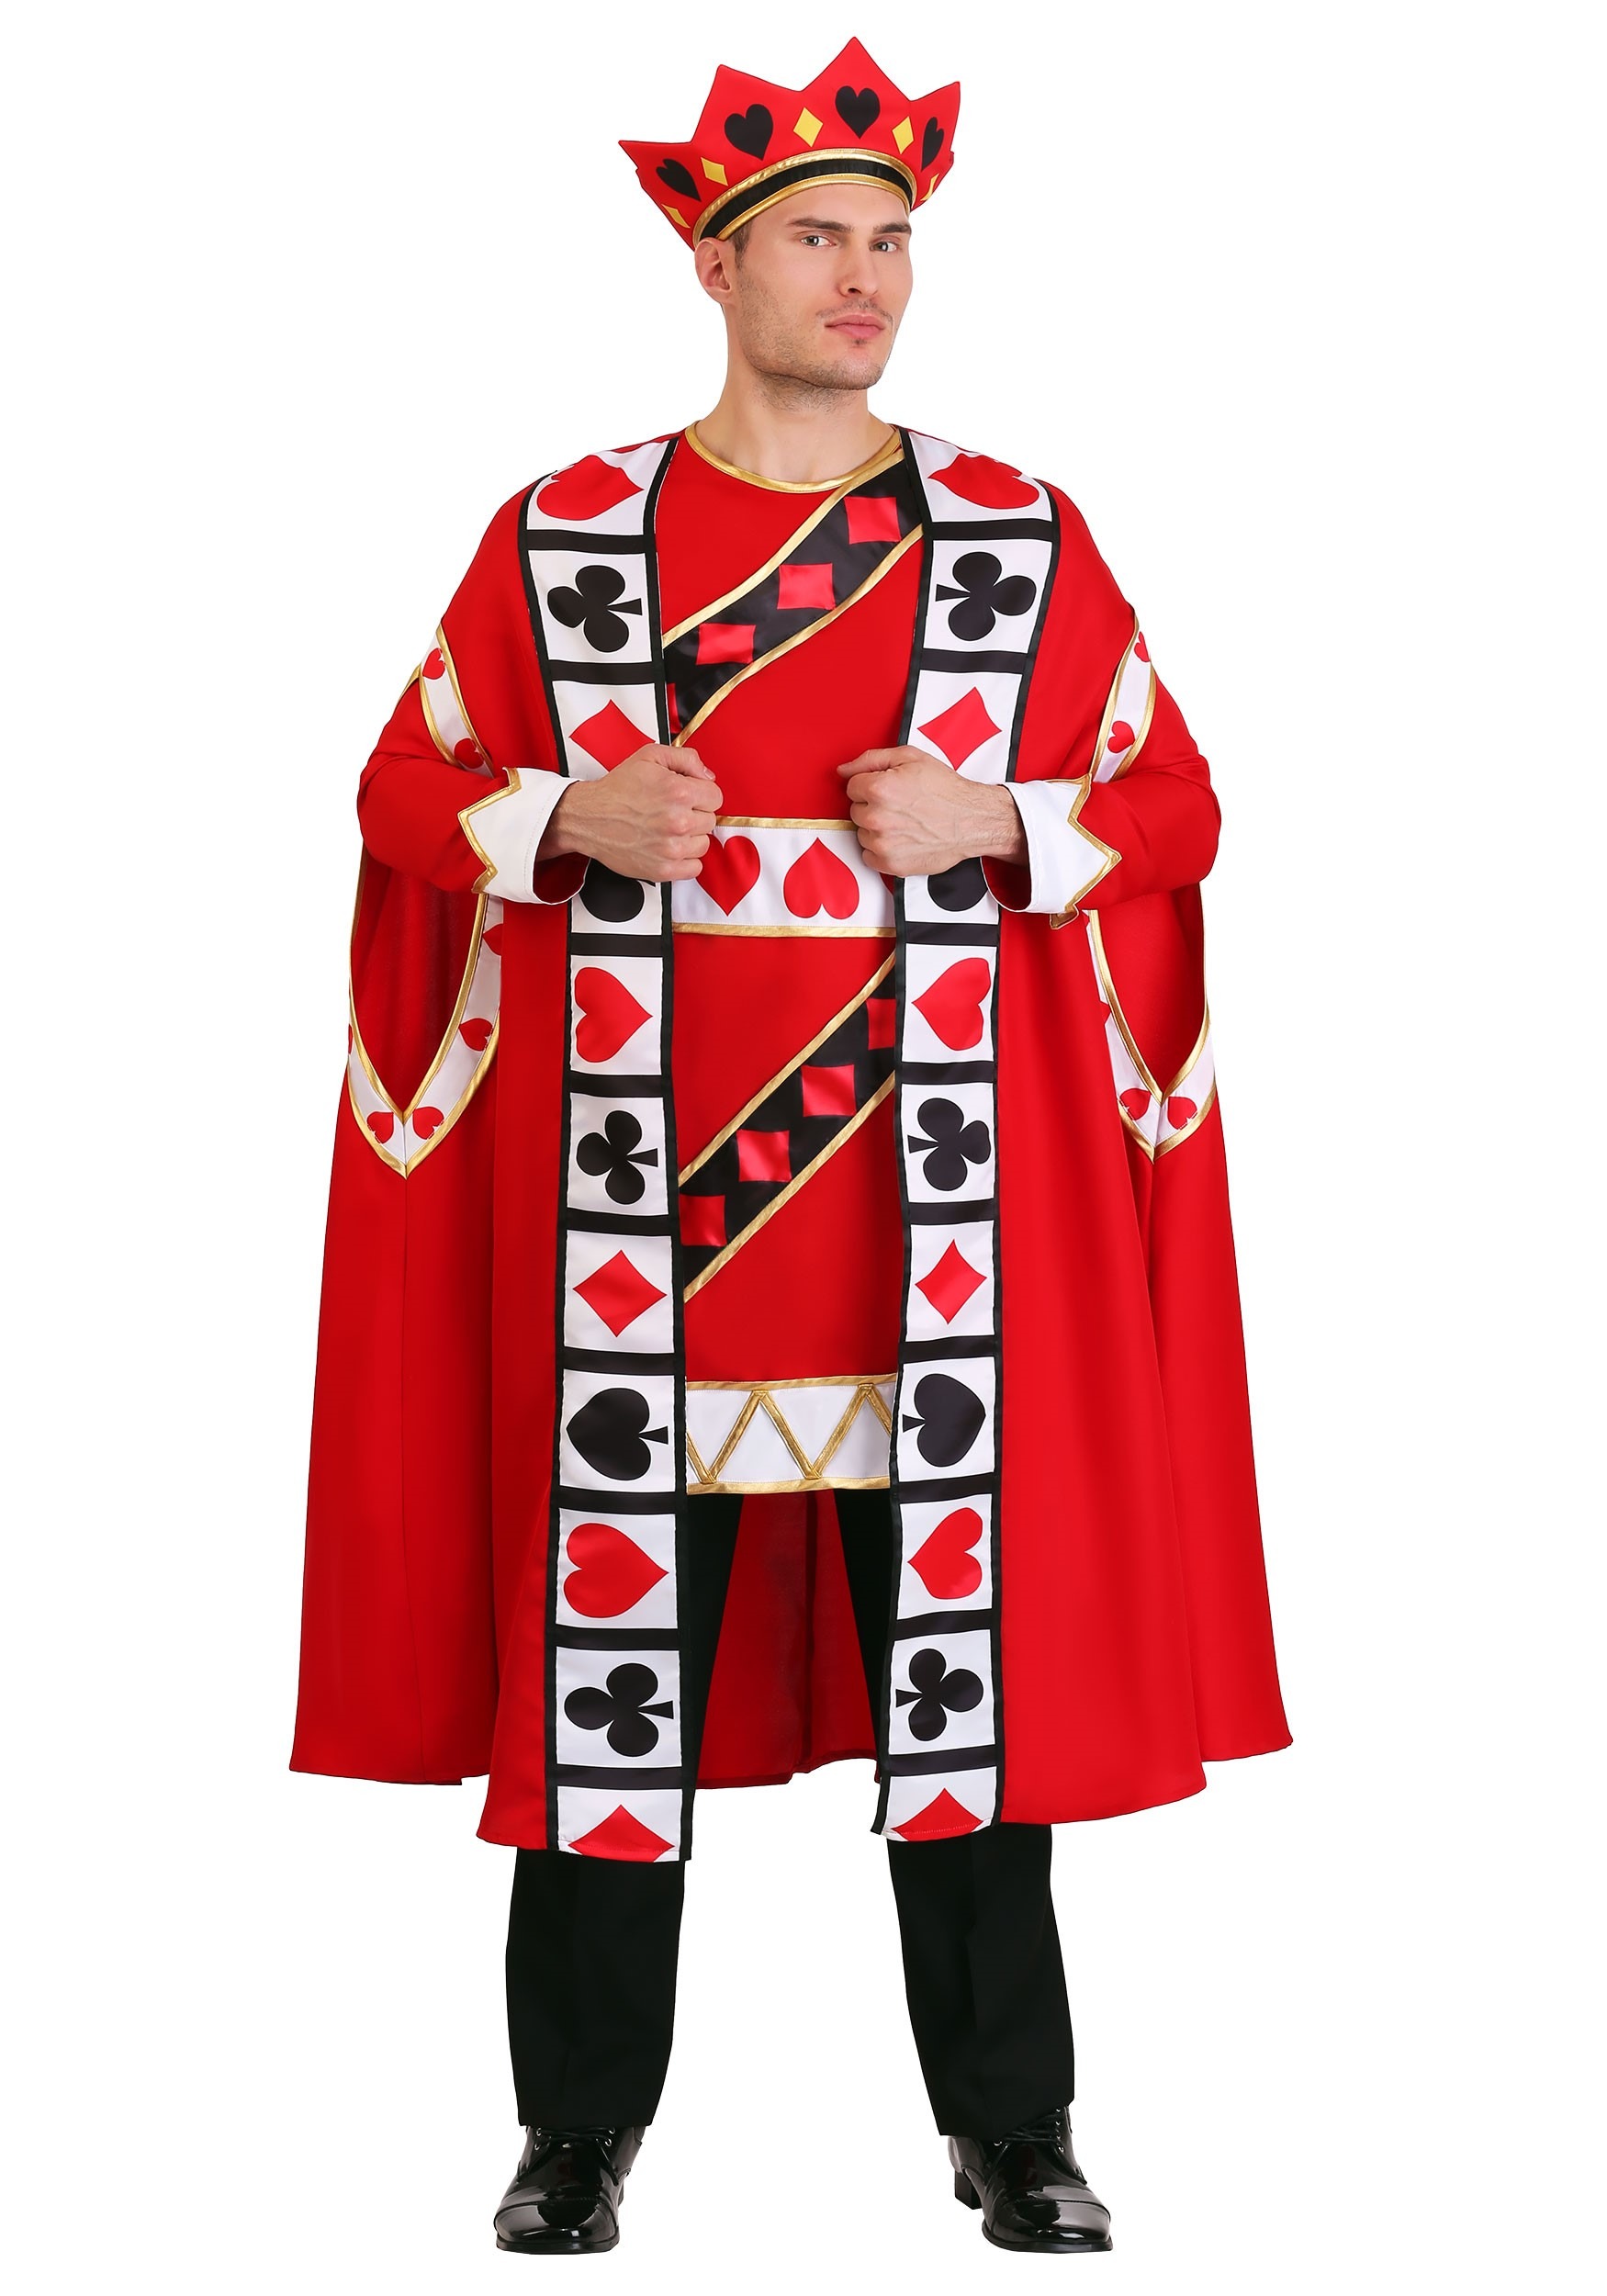 Image of King of Hearts Costume for Men ID FUN7135AD-M